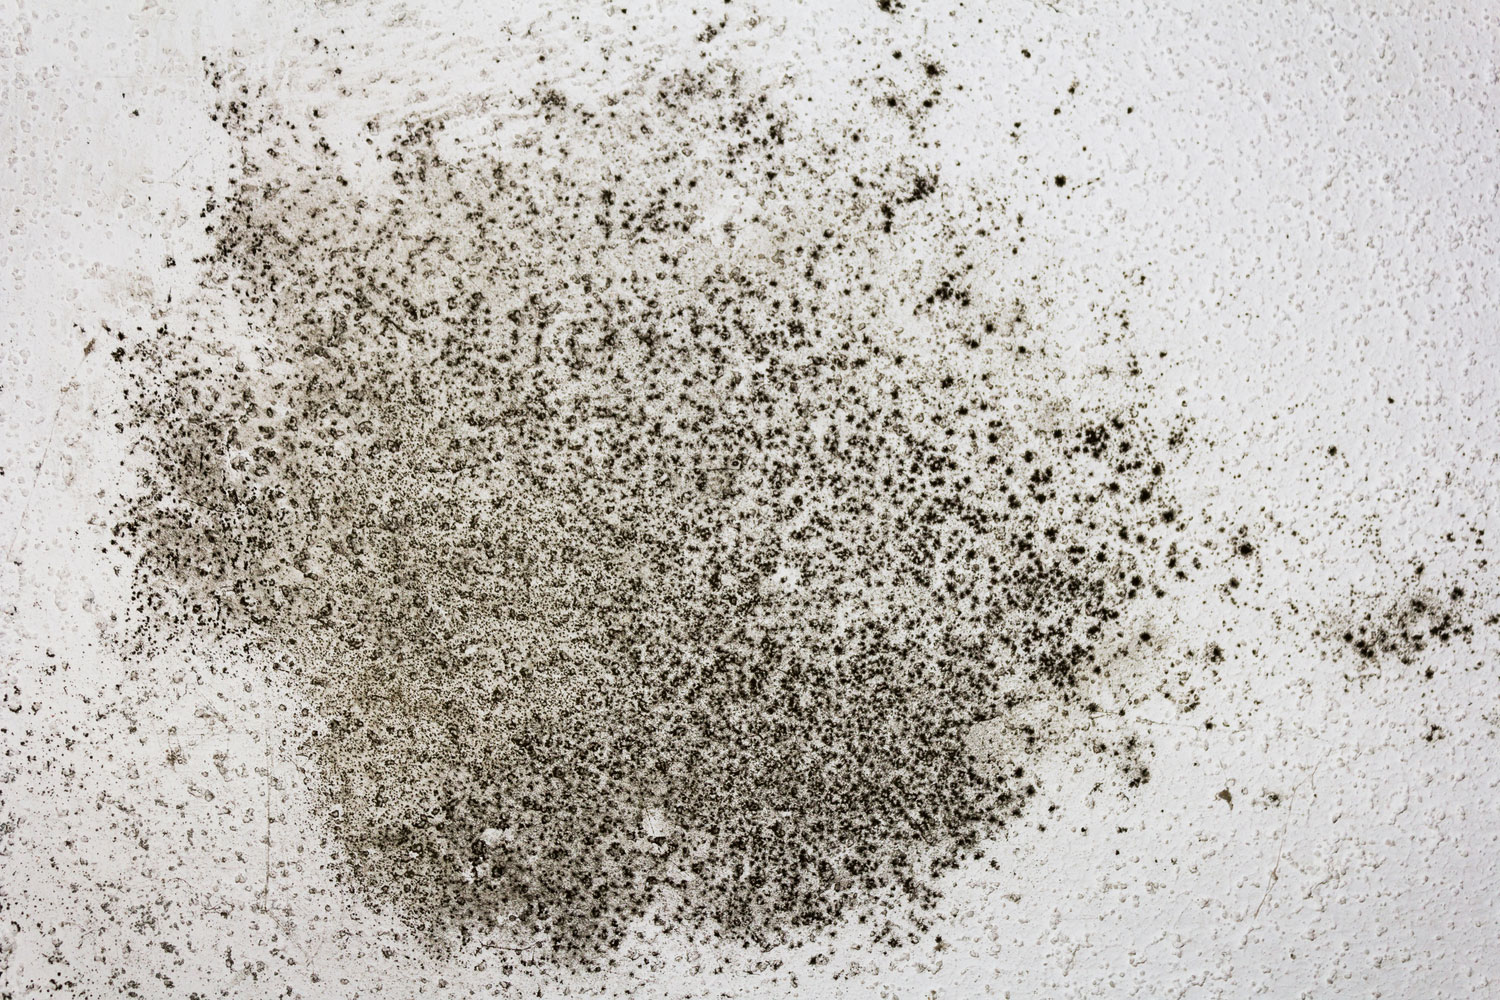 Black Mold Symptoms Removal And Cleaning